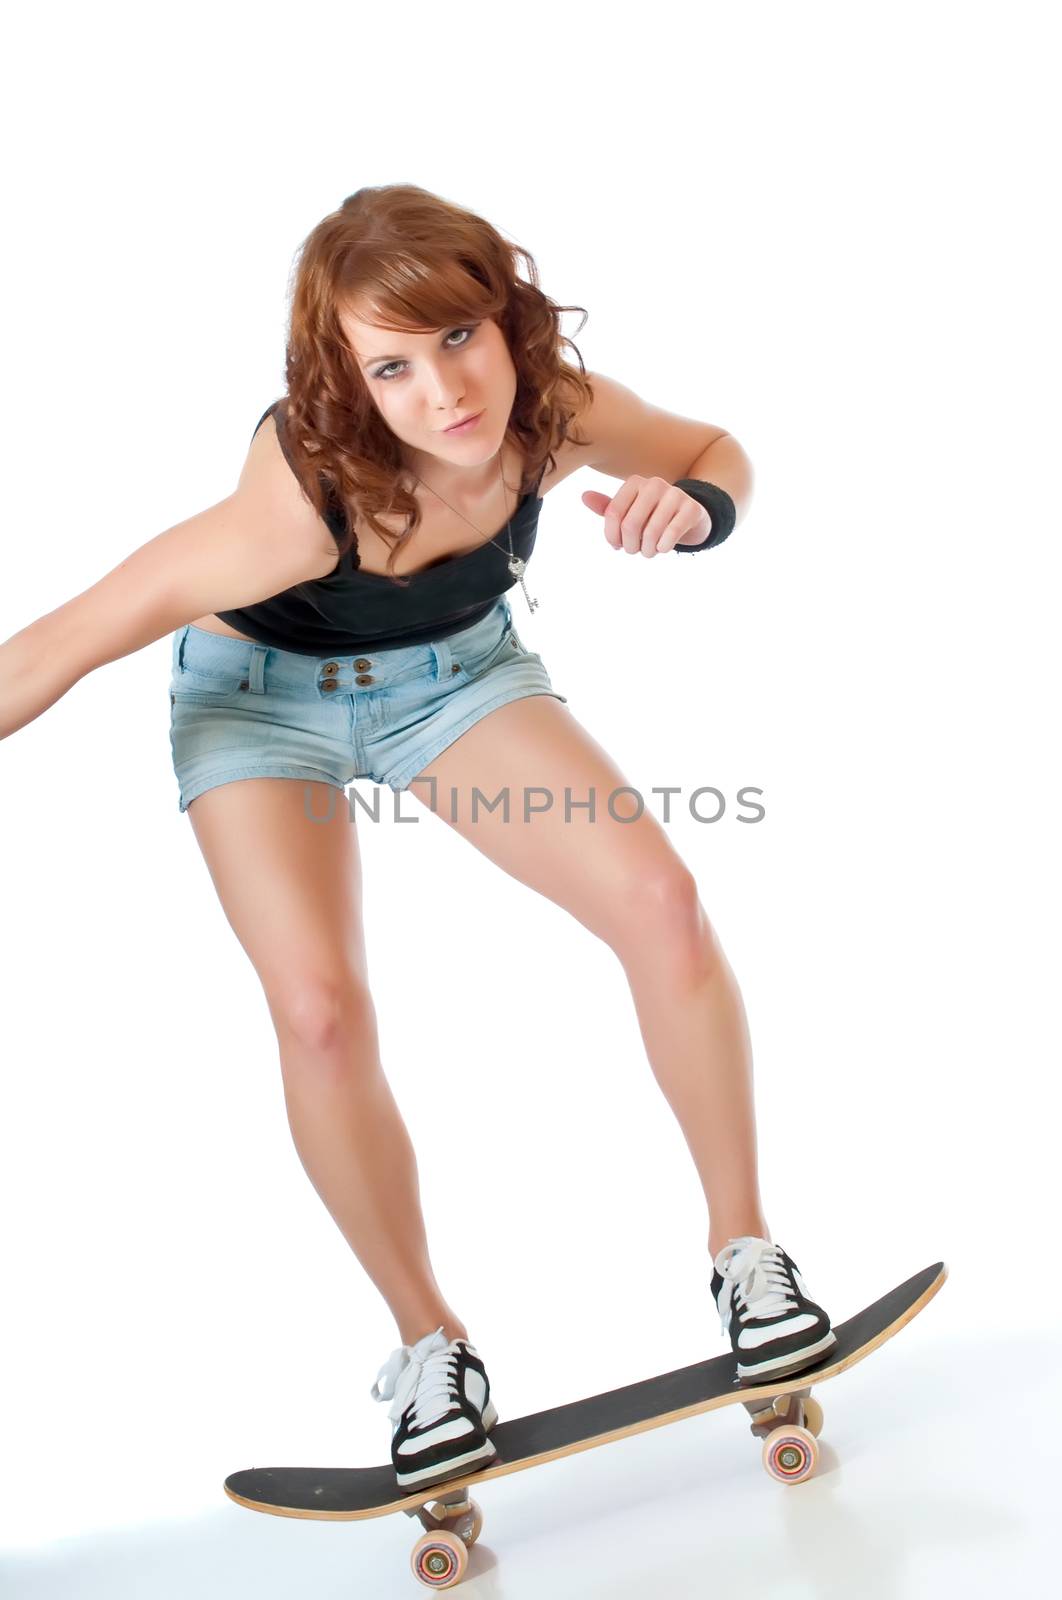 Beautiful young woman riding a skateboard against a white background